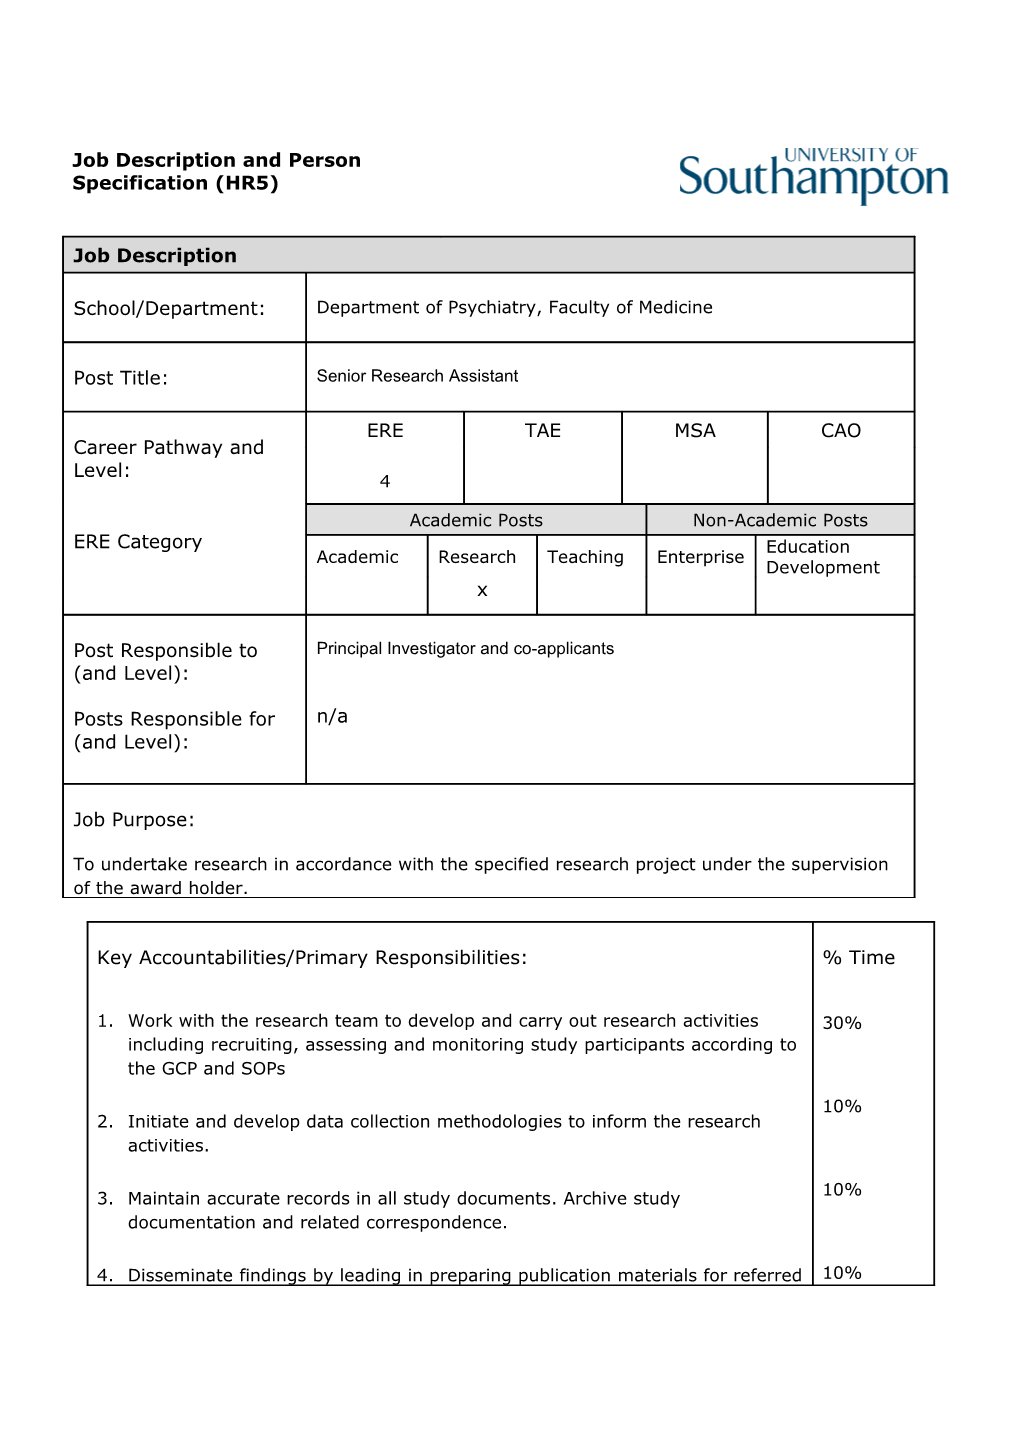 Job Hazard Analysis Form - Appendix to Job and Person Specification